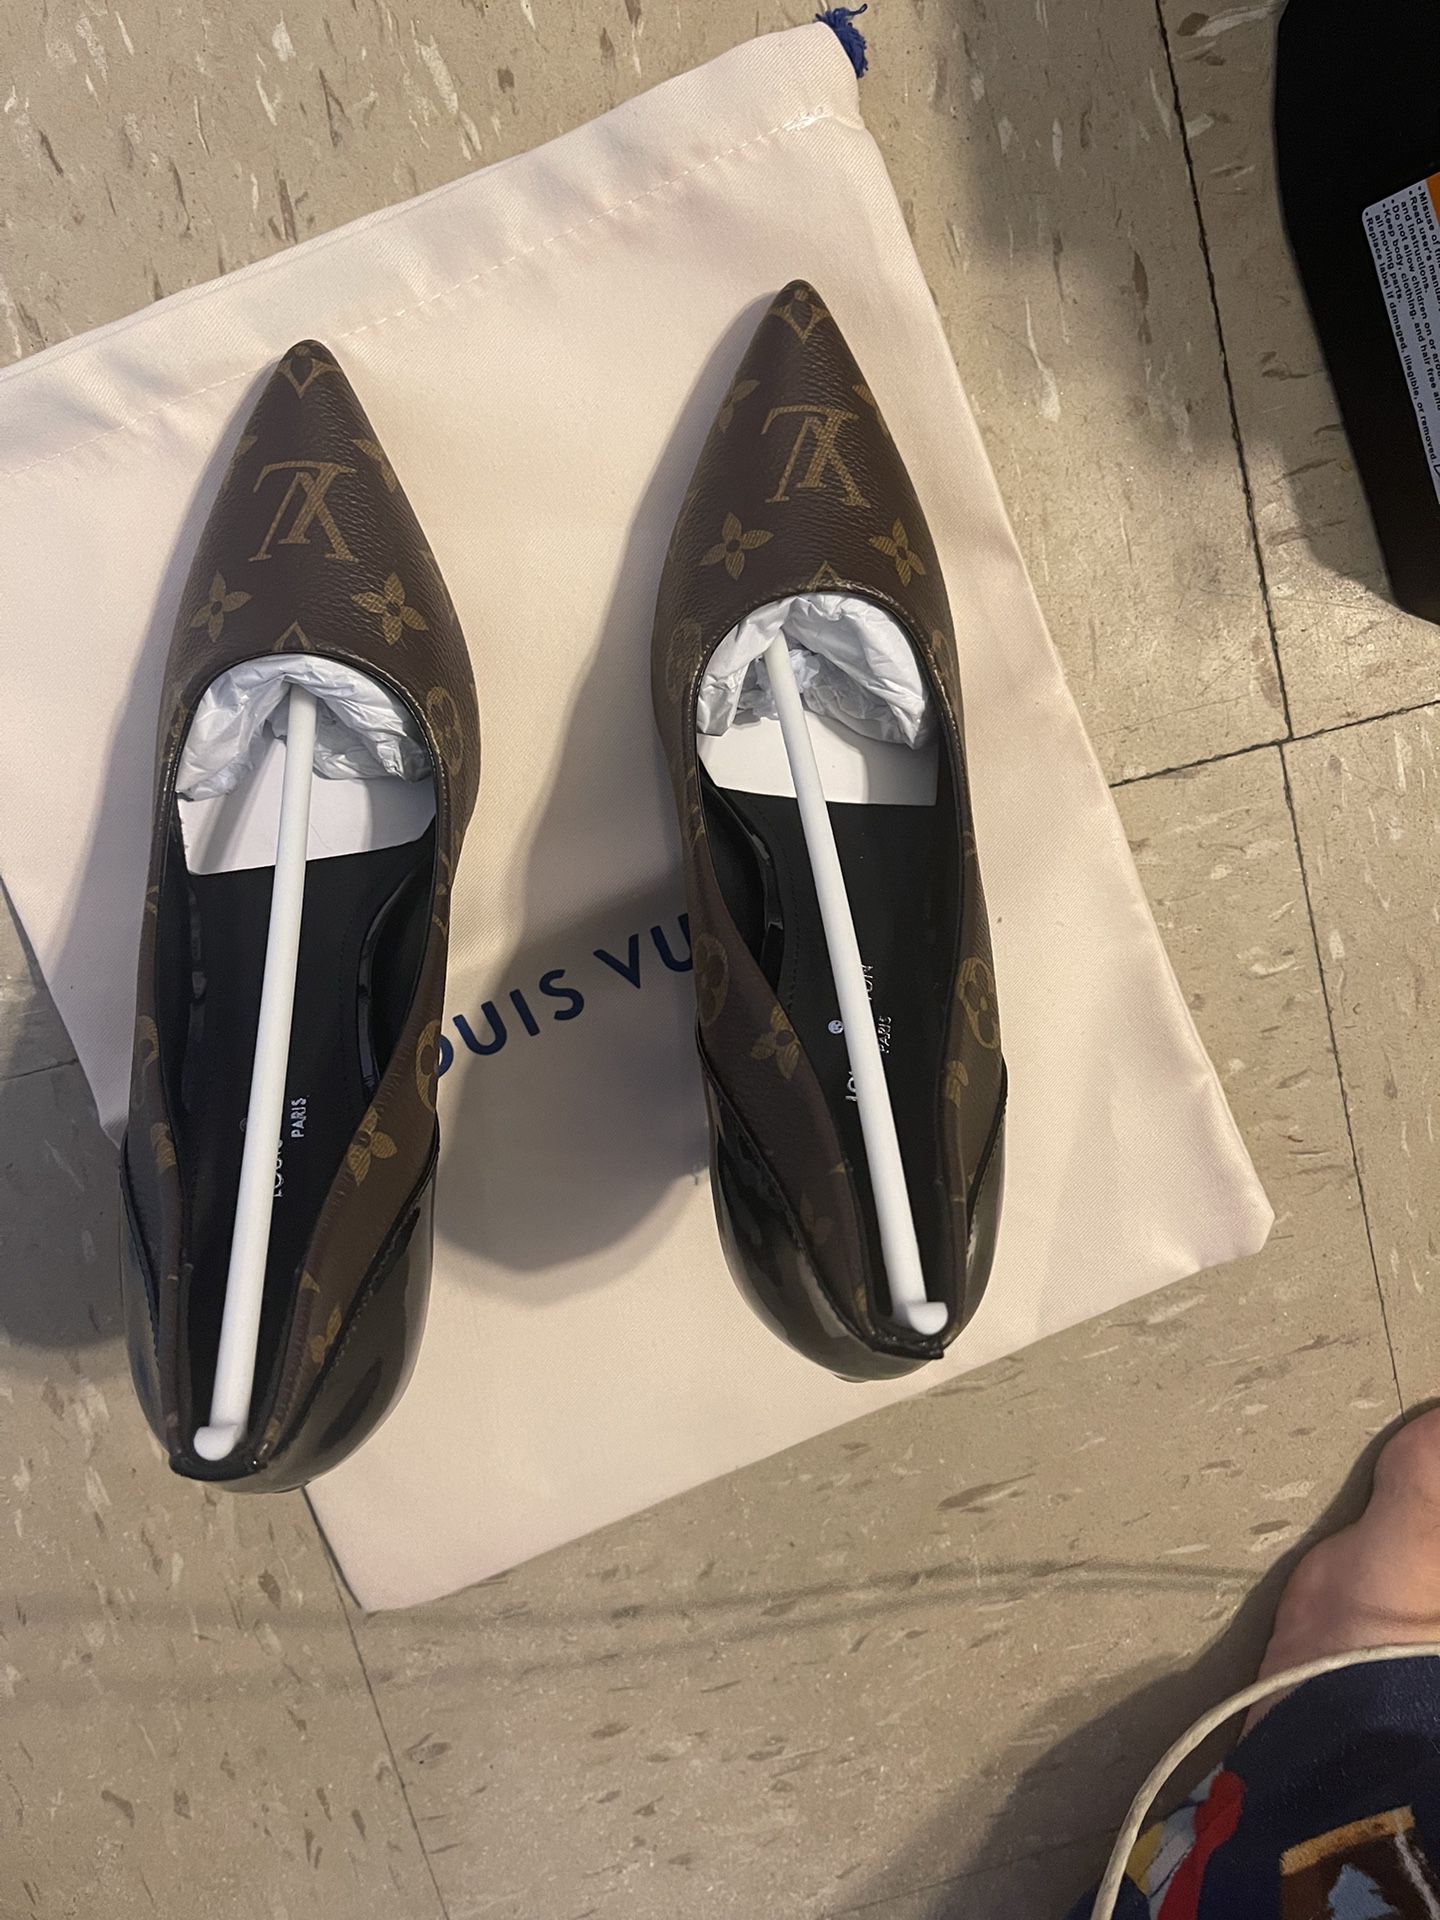 Louis Vuitton Cherie Pumps for Sale in Brooklyn, NY - OfferUp